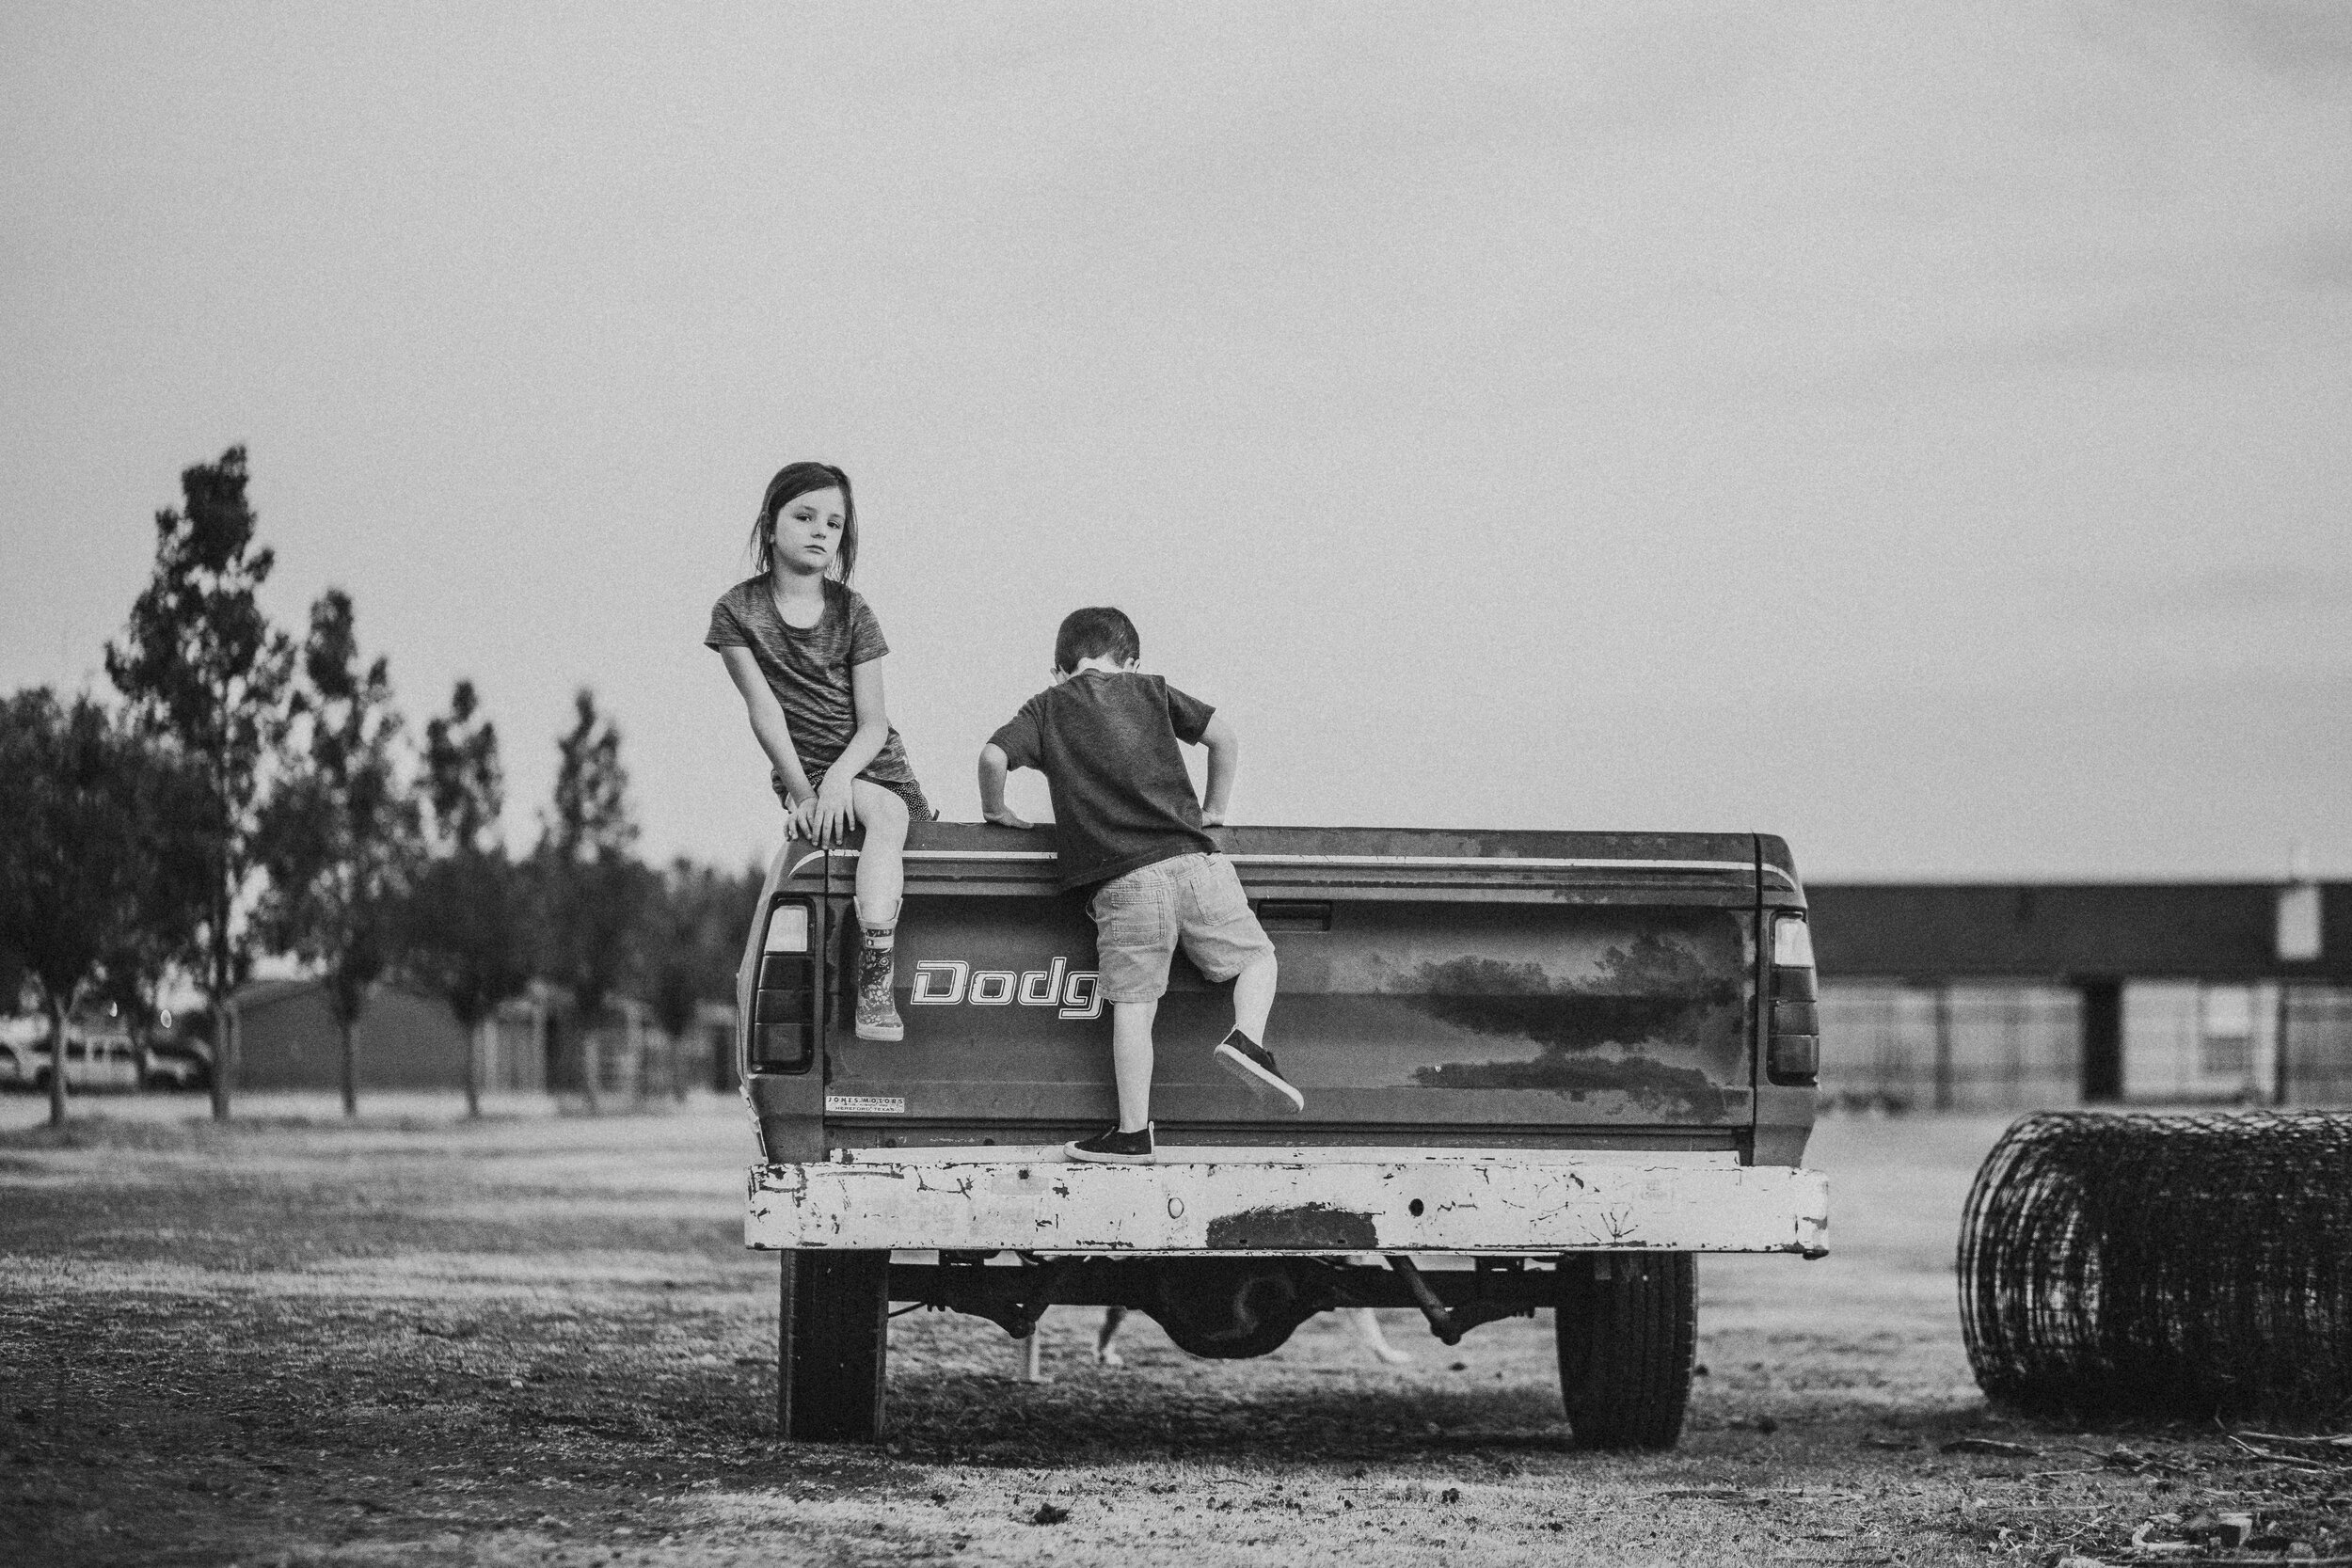  Little one climbs into the truck along with this sister in this black and white timeless photo #tealawardphotography #texasfamilyphotographer #amarillophotographer #amarillofamilyphotographer #lifestylephotography #fallphotos #familyphotoshoot #family #lovingsiblings #photographytips #familyphotos #naturalfamilyinteraction 